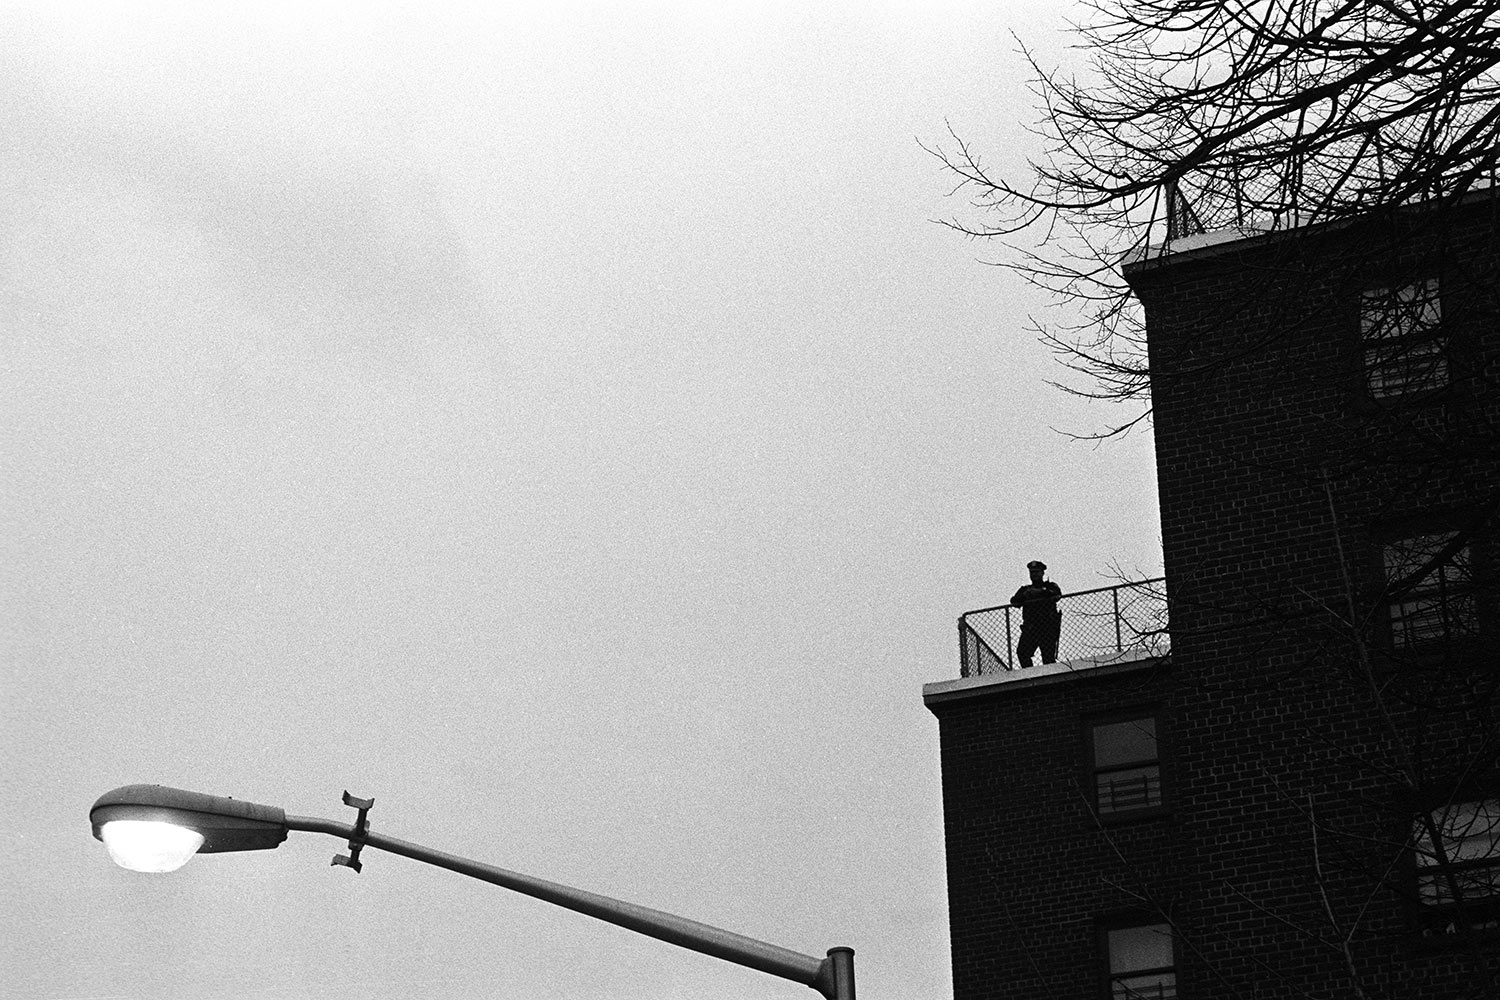 A police officer patrols rooftops of the public housing projects. Summer Housing Public Housing Projects, Bedford Stuyvesant, Brooklyn, NY, 2005.